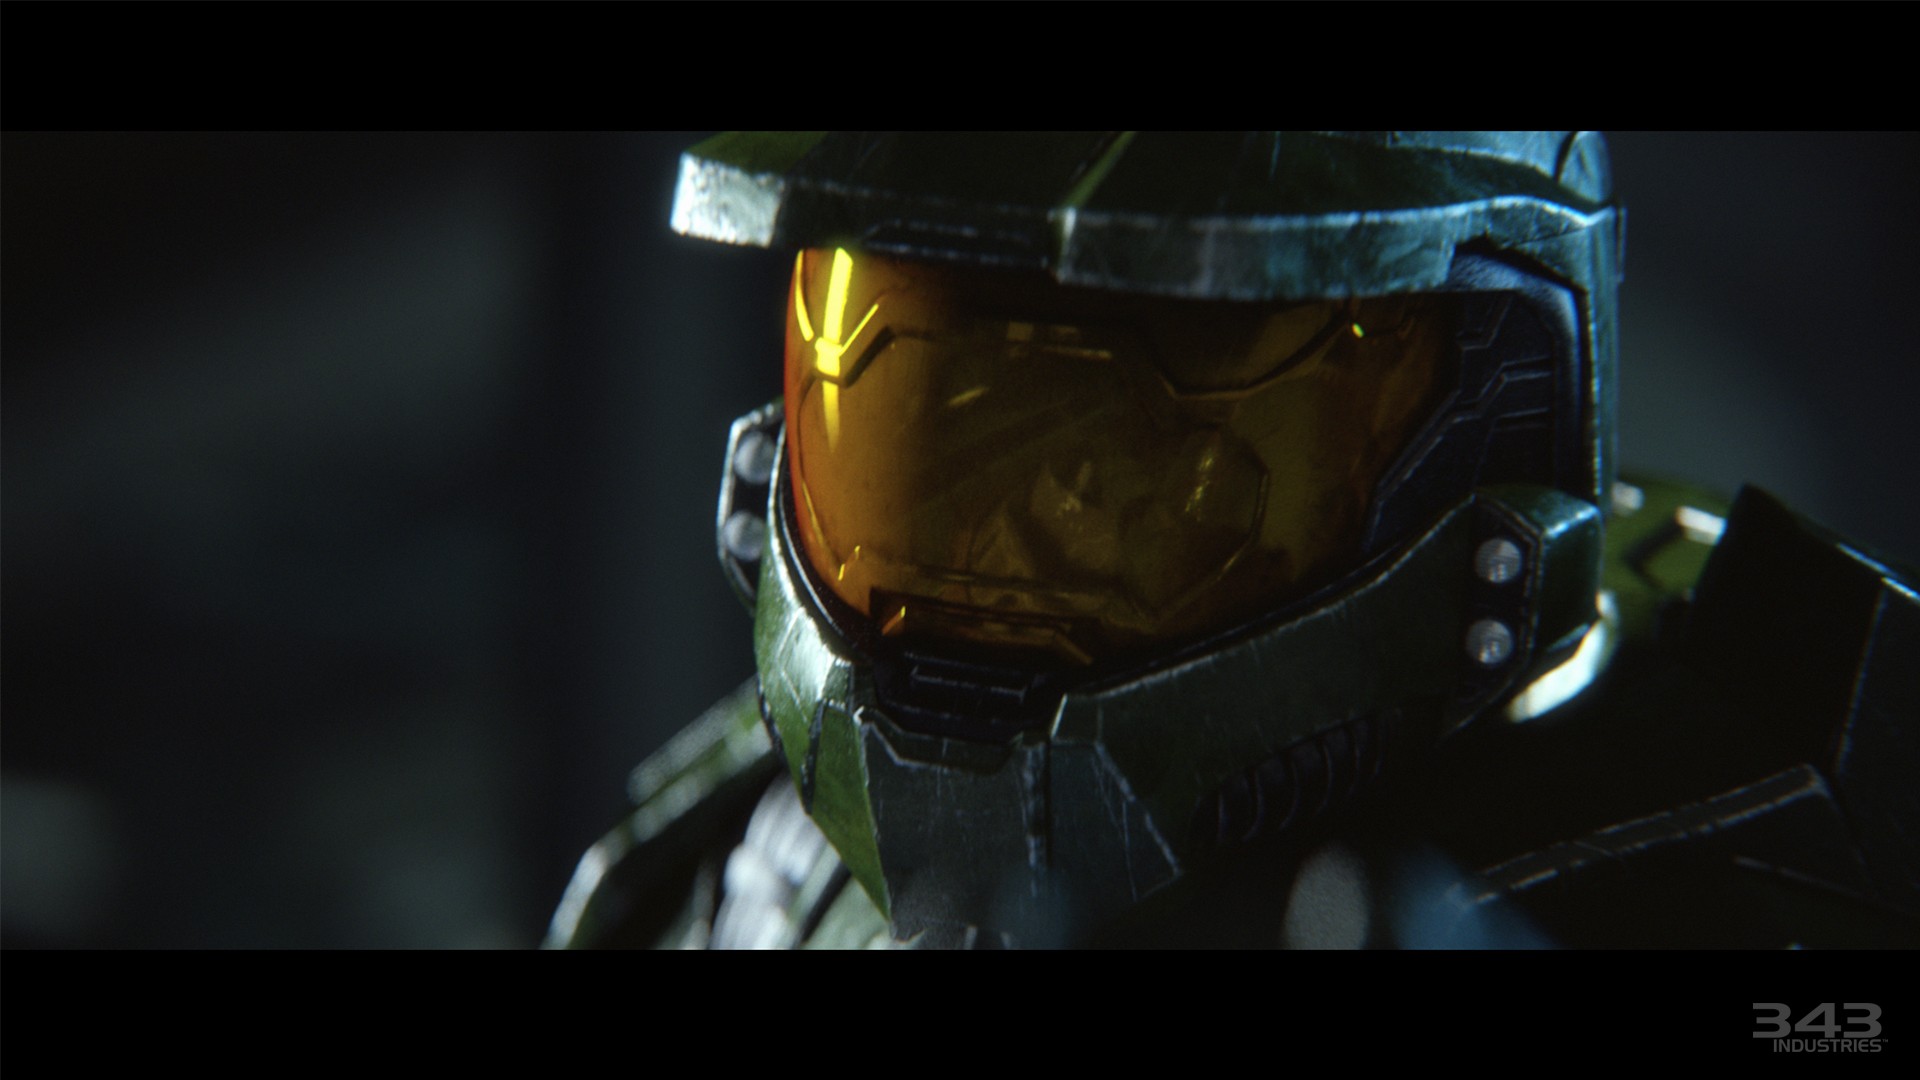 General 1920x1080 Halo (game) Halo: The Master Chief Collection Halo 2 Xbox One video games screen shot 343 Industries Master Chief (Halo) video game characters